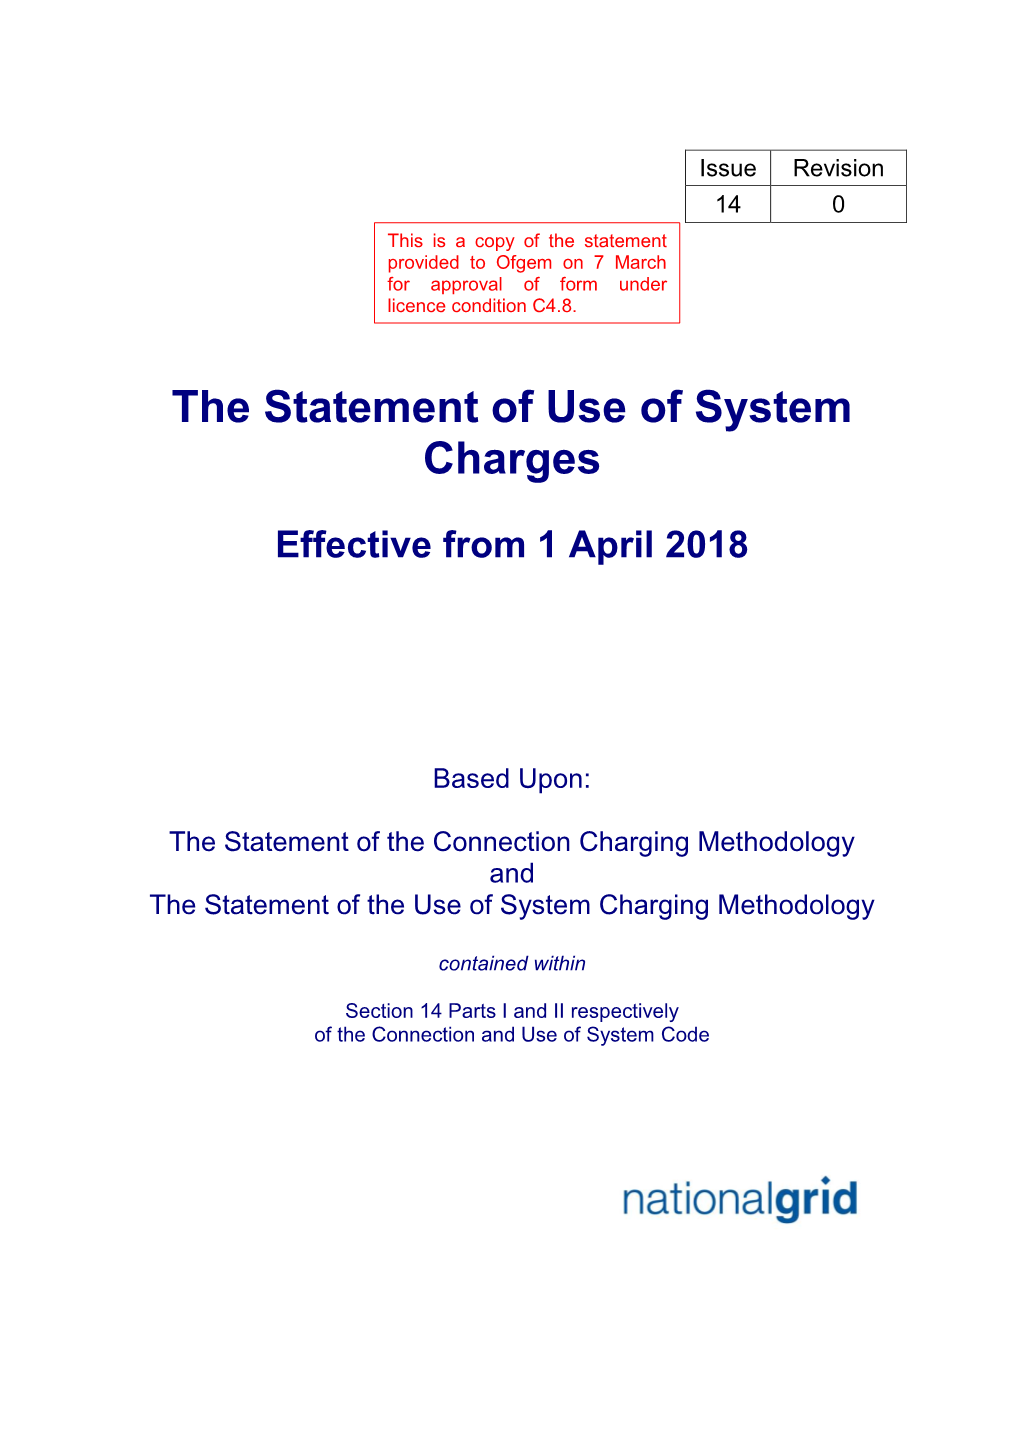 Statement of Use of System Charges